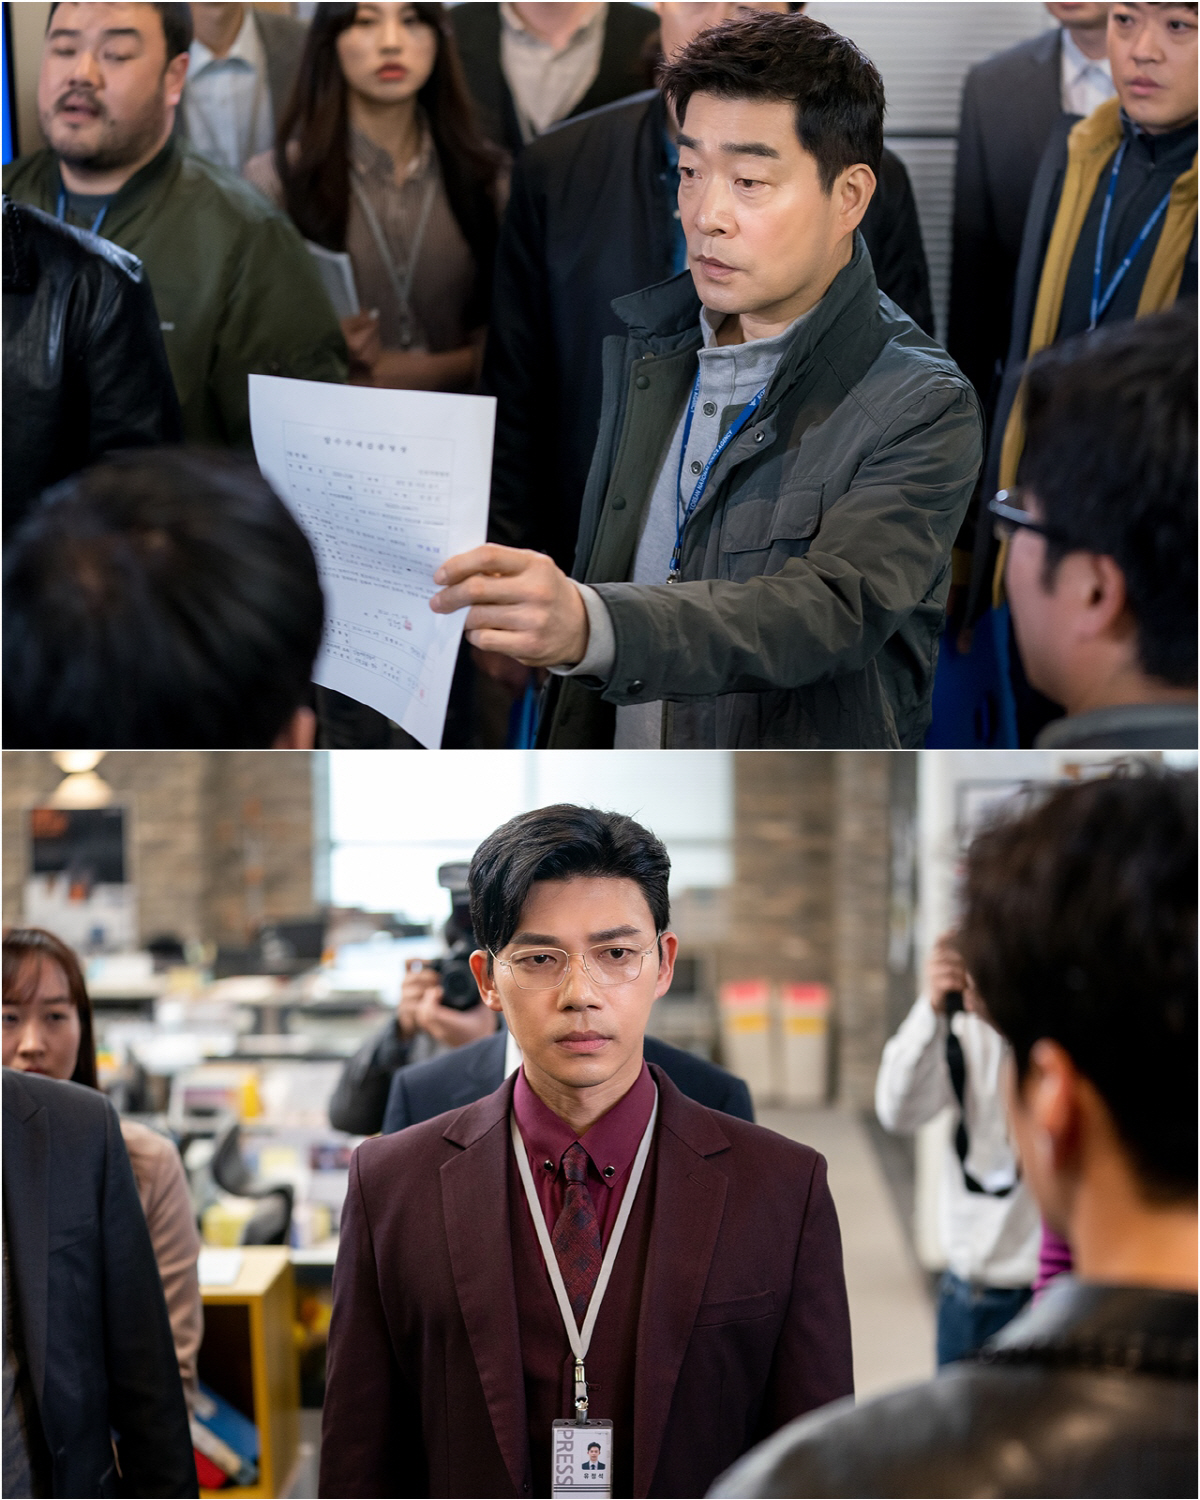 The Good Detective Son Hyun-joo and Oh Ji-hyuks tracking of truth, is there Ji Seung-hyun at the end?JTBCs monthly drama The Good Detective (playplay by Choi Jin-won, director Cho Nam-guk, production blossom story, JTBC studio) released a thrilling still today (18th) night just by watching it ahead of the main broadcast.Detectives from the two strong teams, including Kang Do-chang (Son Hyun-joo) and Oh Ji-hyuk (Jang Seung-jo), are currently in front of Yoo Jung-seok (Ji Seung-hyun), the head of the social affairs department of Jeong Han-ilbo, the most likely Suspect of the Jang Jin-soo killing case.Last night, expectations are exploding as to whether Yoo Jung-seok could be arrested, following Oh Jong-tae (Oh Jeong-se).The reason why the sweat is getting in my hand just by looking at this image is because of the 14th preview video released immediately after the broadcast.Yoo Jung-seok confidently told Kang Do-chang and Oh Ji-hyuk, who came to him, It will not be easy to convert me into a suspect with only the circumstances.In addition, Detectives came to the Han Ilbo with a search warrant and did not lose their dignified attitude, saying, You should be careful to warn even when you are suspected of being a strong Suspect.It was a question that he was right.The suspicions of Kang Do-chang, Oh Ji-hyeok, and Jin Seo-kyung (Ieliya) began with the fact that there was Yoo Jung-seok at the same place on the day of Jang Jin-soo Detective killing.The Gawol Church, which was the scene of the incident, was the place where the person named Cho Sung-ki was working as a pastor under the pseudonym Kim Kwang-hoon, and Yoo Jung-seok went to see him.As it turns out, Cho Sung-gi was an torture police officer who disappeared during the investigation, and there was a painful past where Yoo Jung-seoks sister, Yoo Jung-sun, committed suicide.Cho Sung-ki also disappeared on the day when Jang Jin-soo was killed.As his brother Cho Seong-dae (Jo Jae-ryong) revealed, My brother is dead, he was found as an ashes in a place 30 minutes drive from Gawol Church.On the same day, Cho Seong-gi and Jang Jin-soo Detective were all killed, and it was highly likely that the killer was one.But there was no reason to kill Yoo Jung-seok to kill Cho Seong-gi, but there was no reason to kill Jang Jin-soo.What truths will Kang Do-chang and Oh Ji-hyeok find today (18th) night?The 14th episode of The Good Detective, which brought tensions to a peak, Tuesday night at 9:30 p.m. on JTBC.